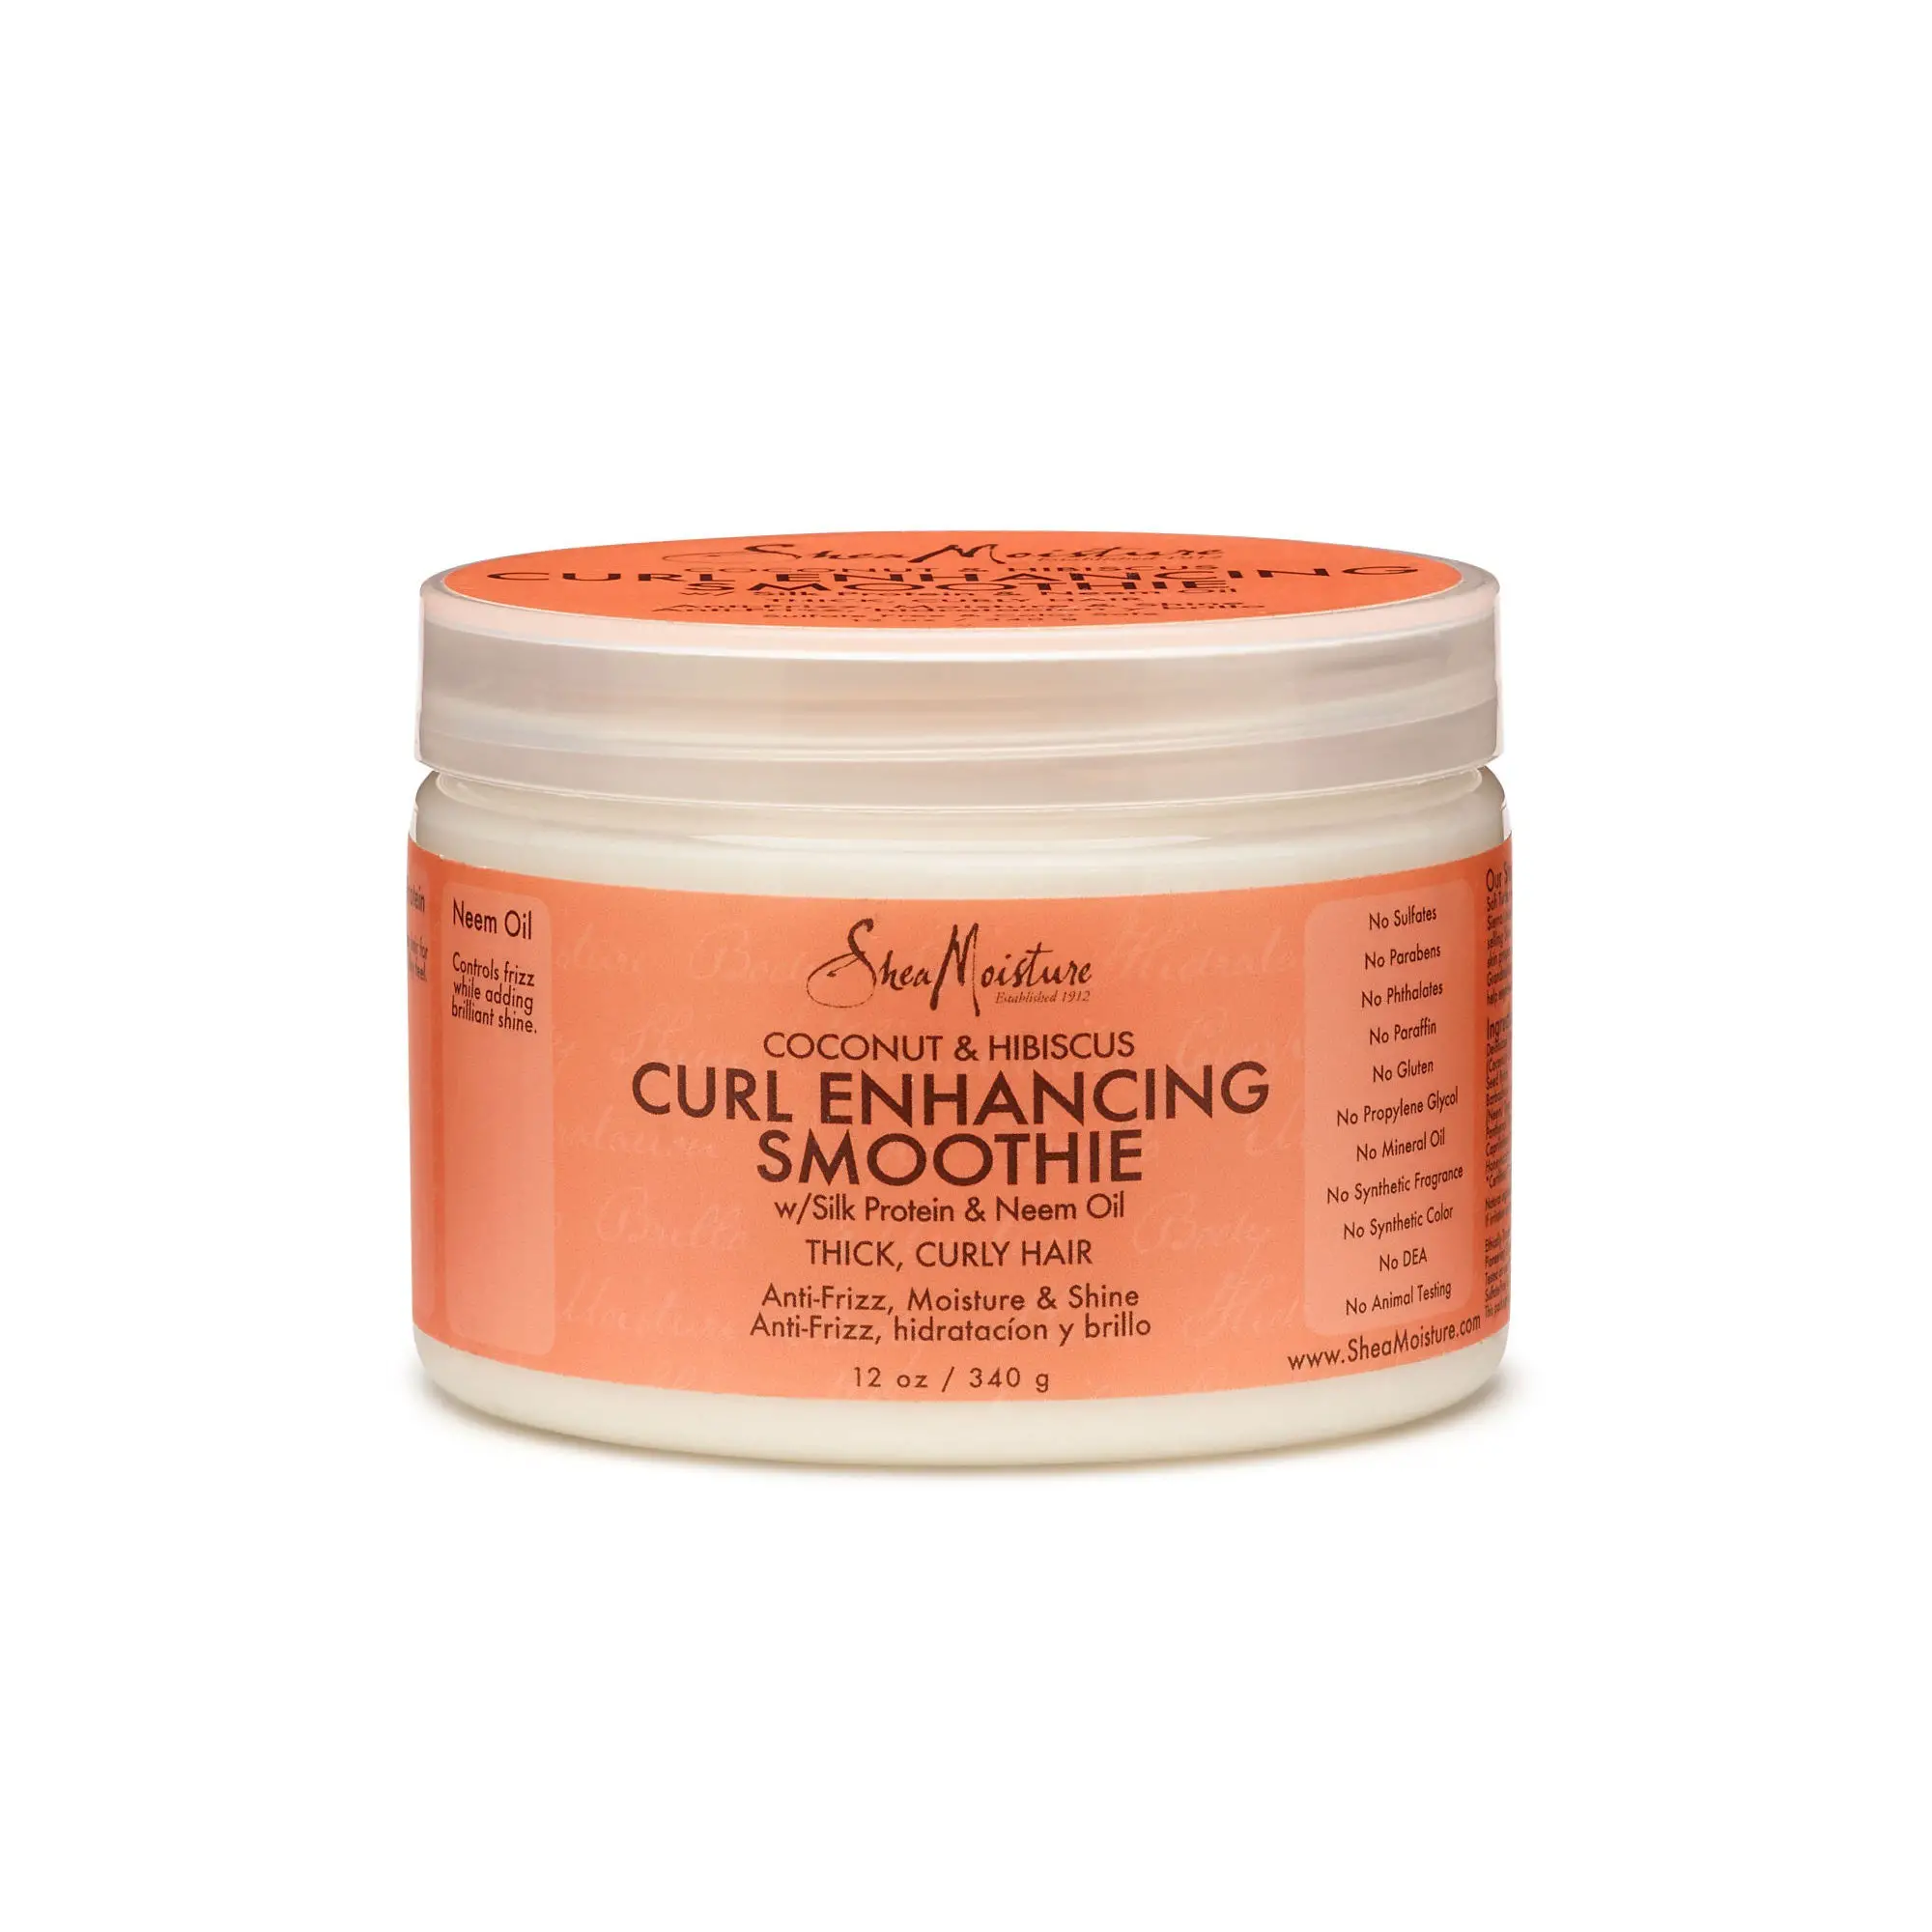 Shea Moisture Coconut & Hibiscus Curl Enhancing Smoothie best product for two strand for two strand twist